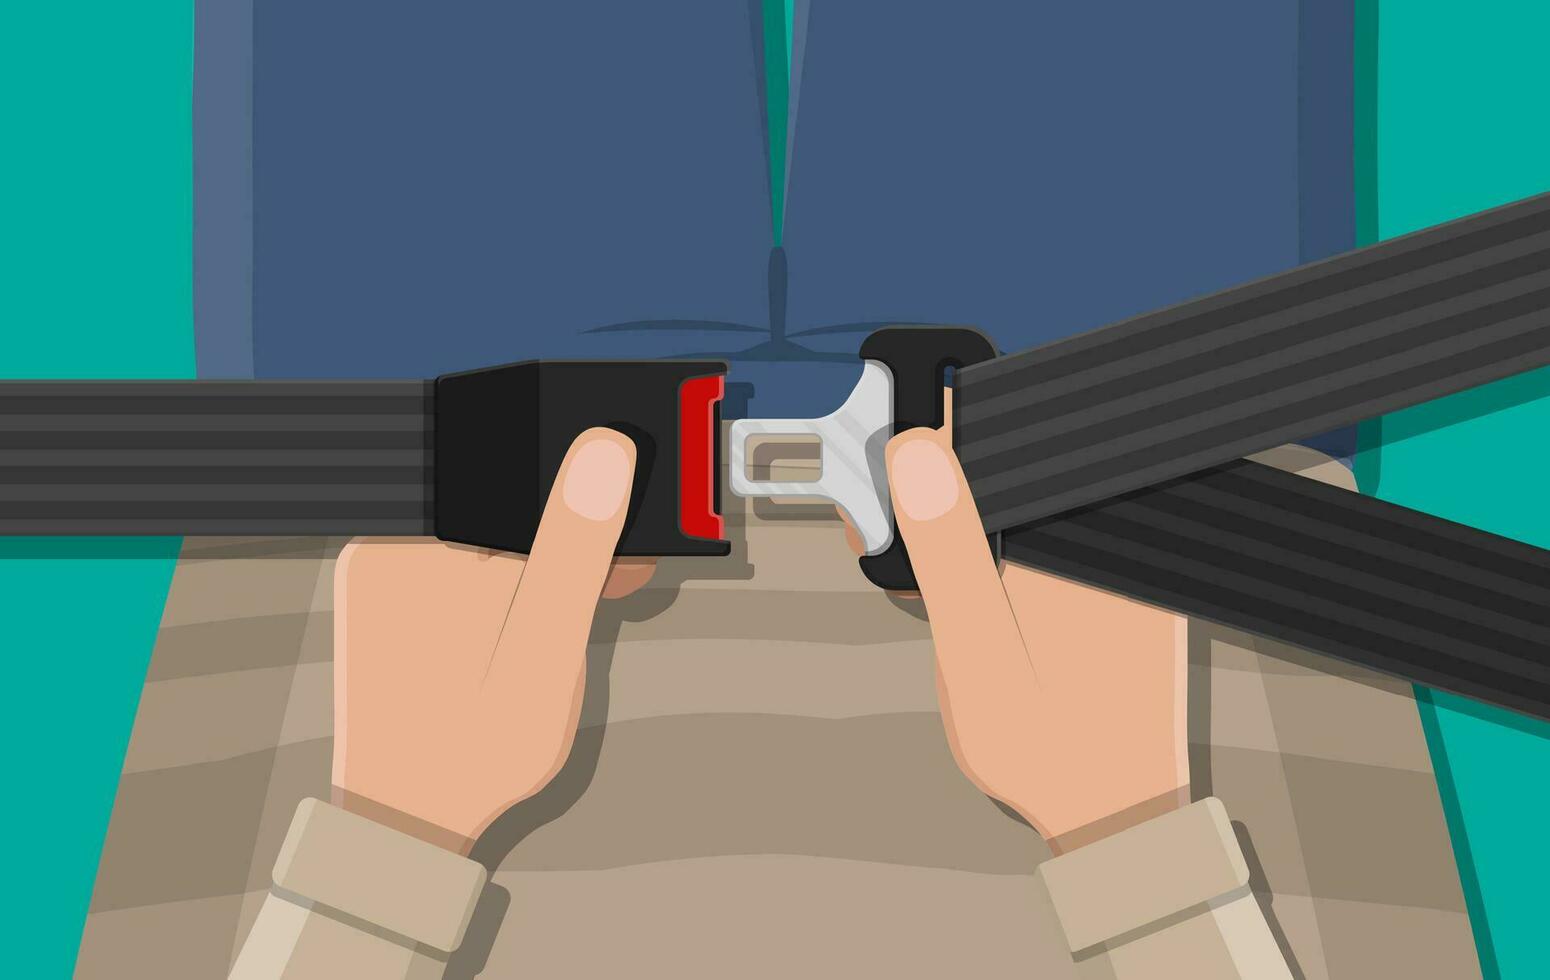 Safety belt in hand. Seat belt for protection. Lifesaver. Safety equipment for car and plane. Vector illustration in flat style